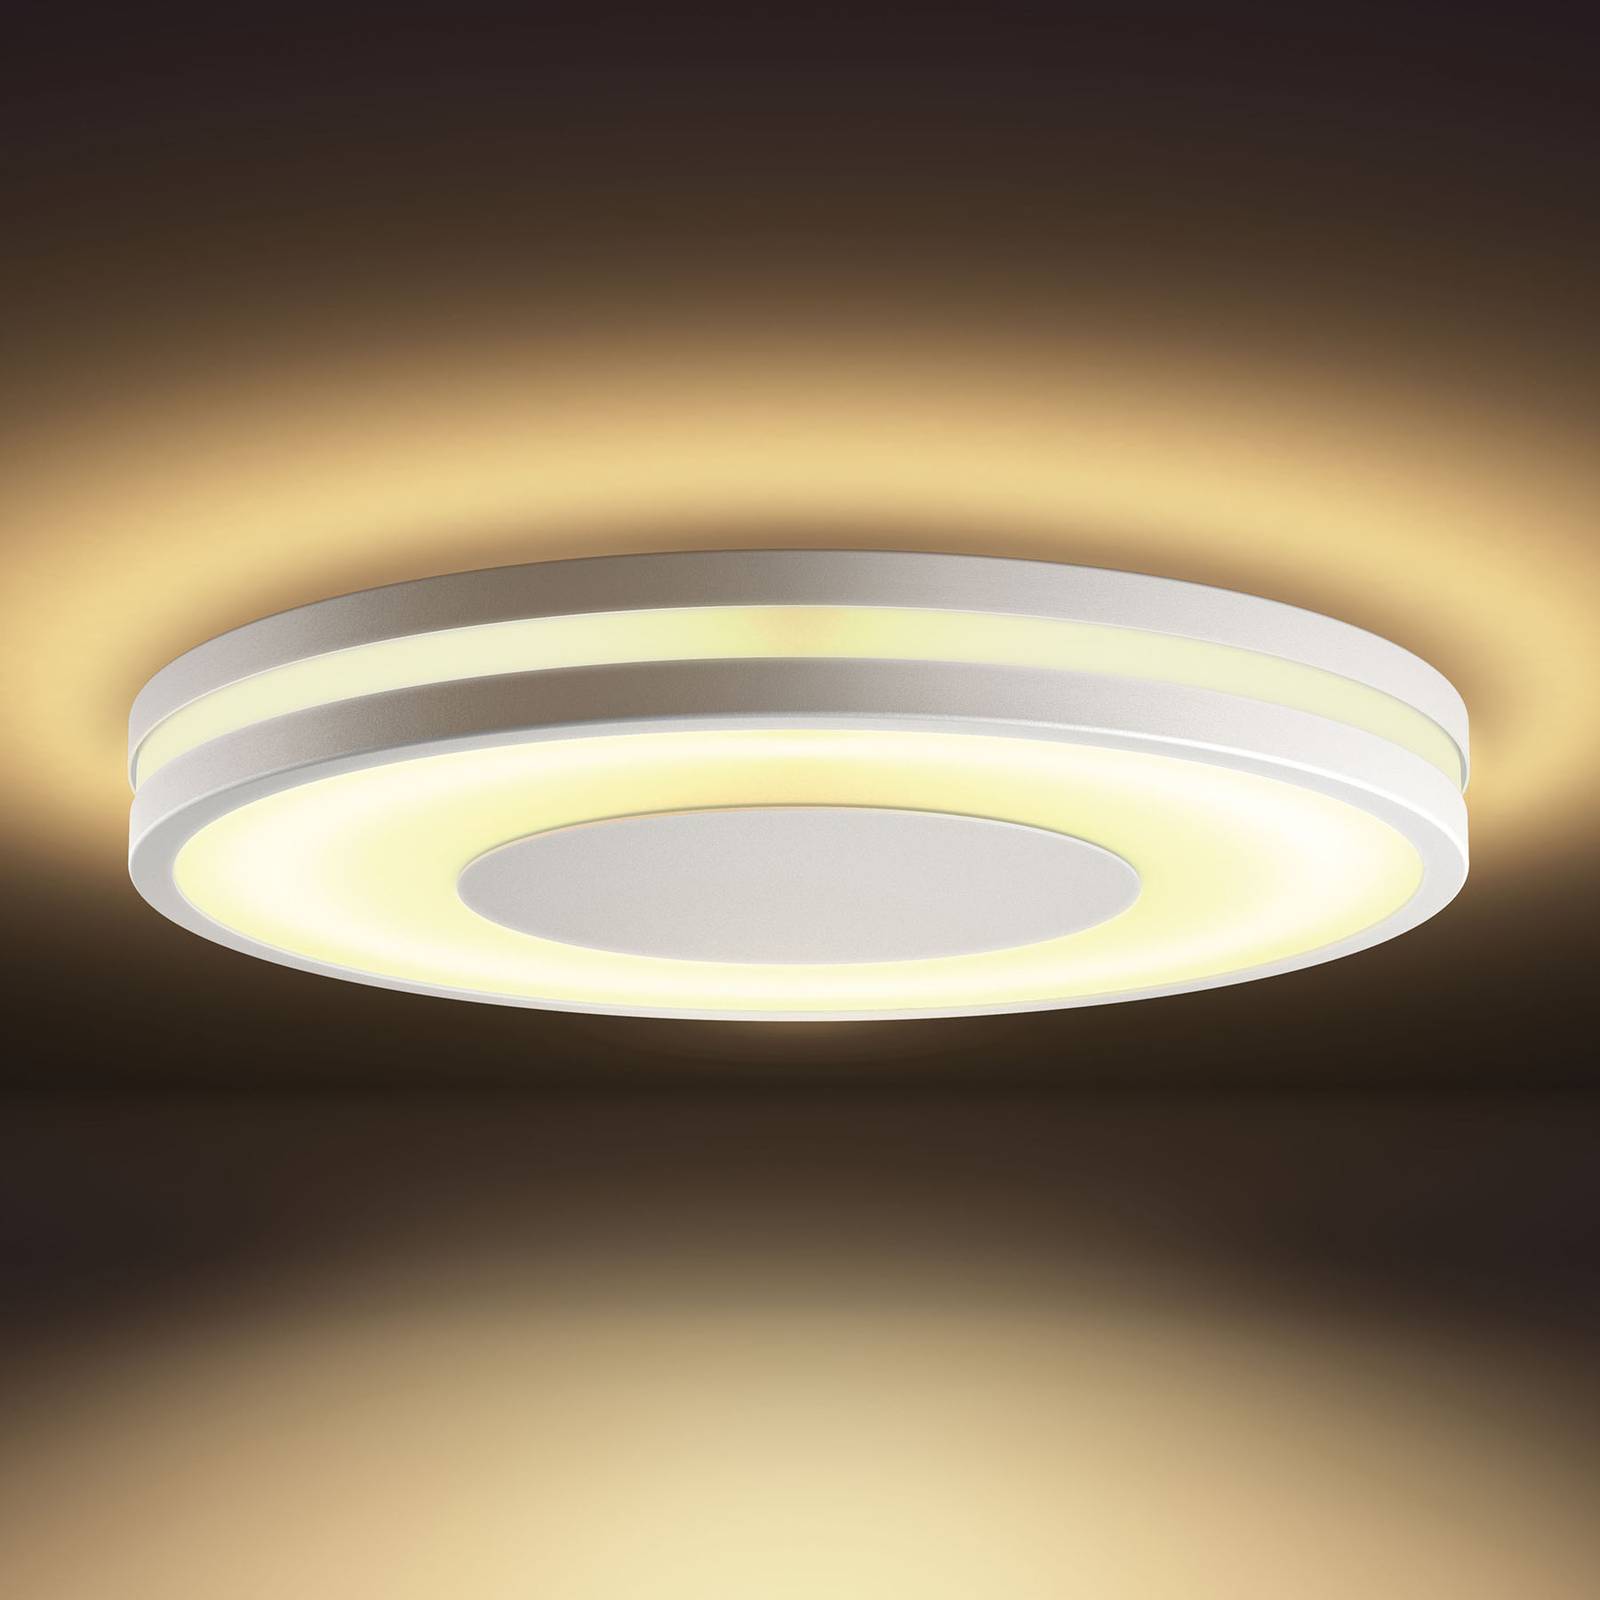 Hassy Knikken animatie Philips Hue White Ambiance Being plafondlamp wit | Lampen24.nl